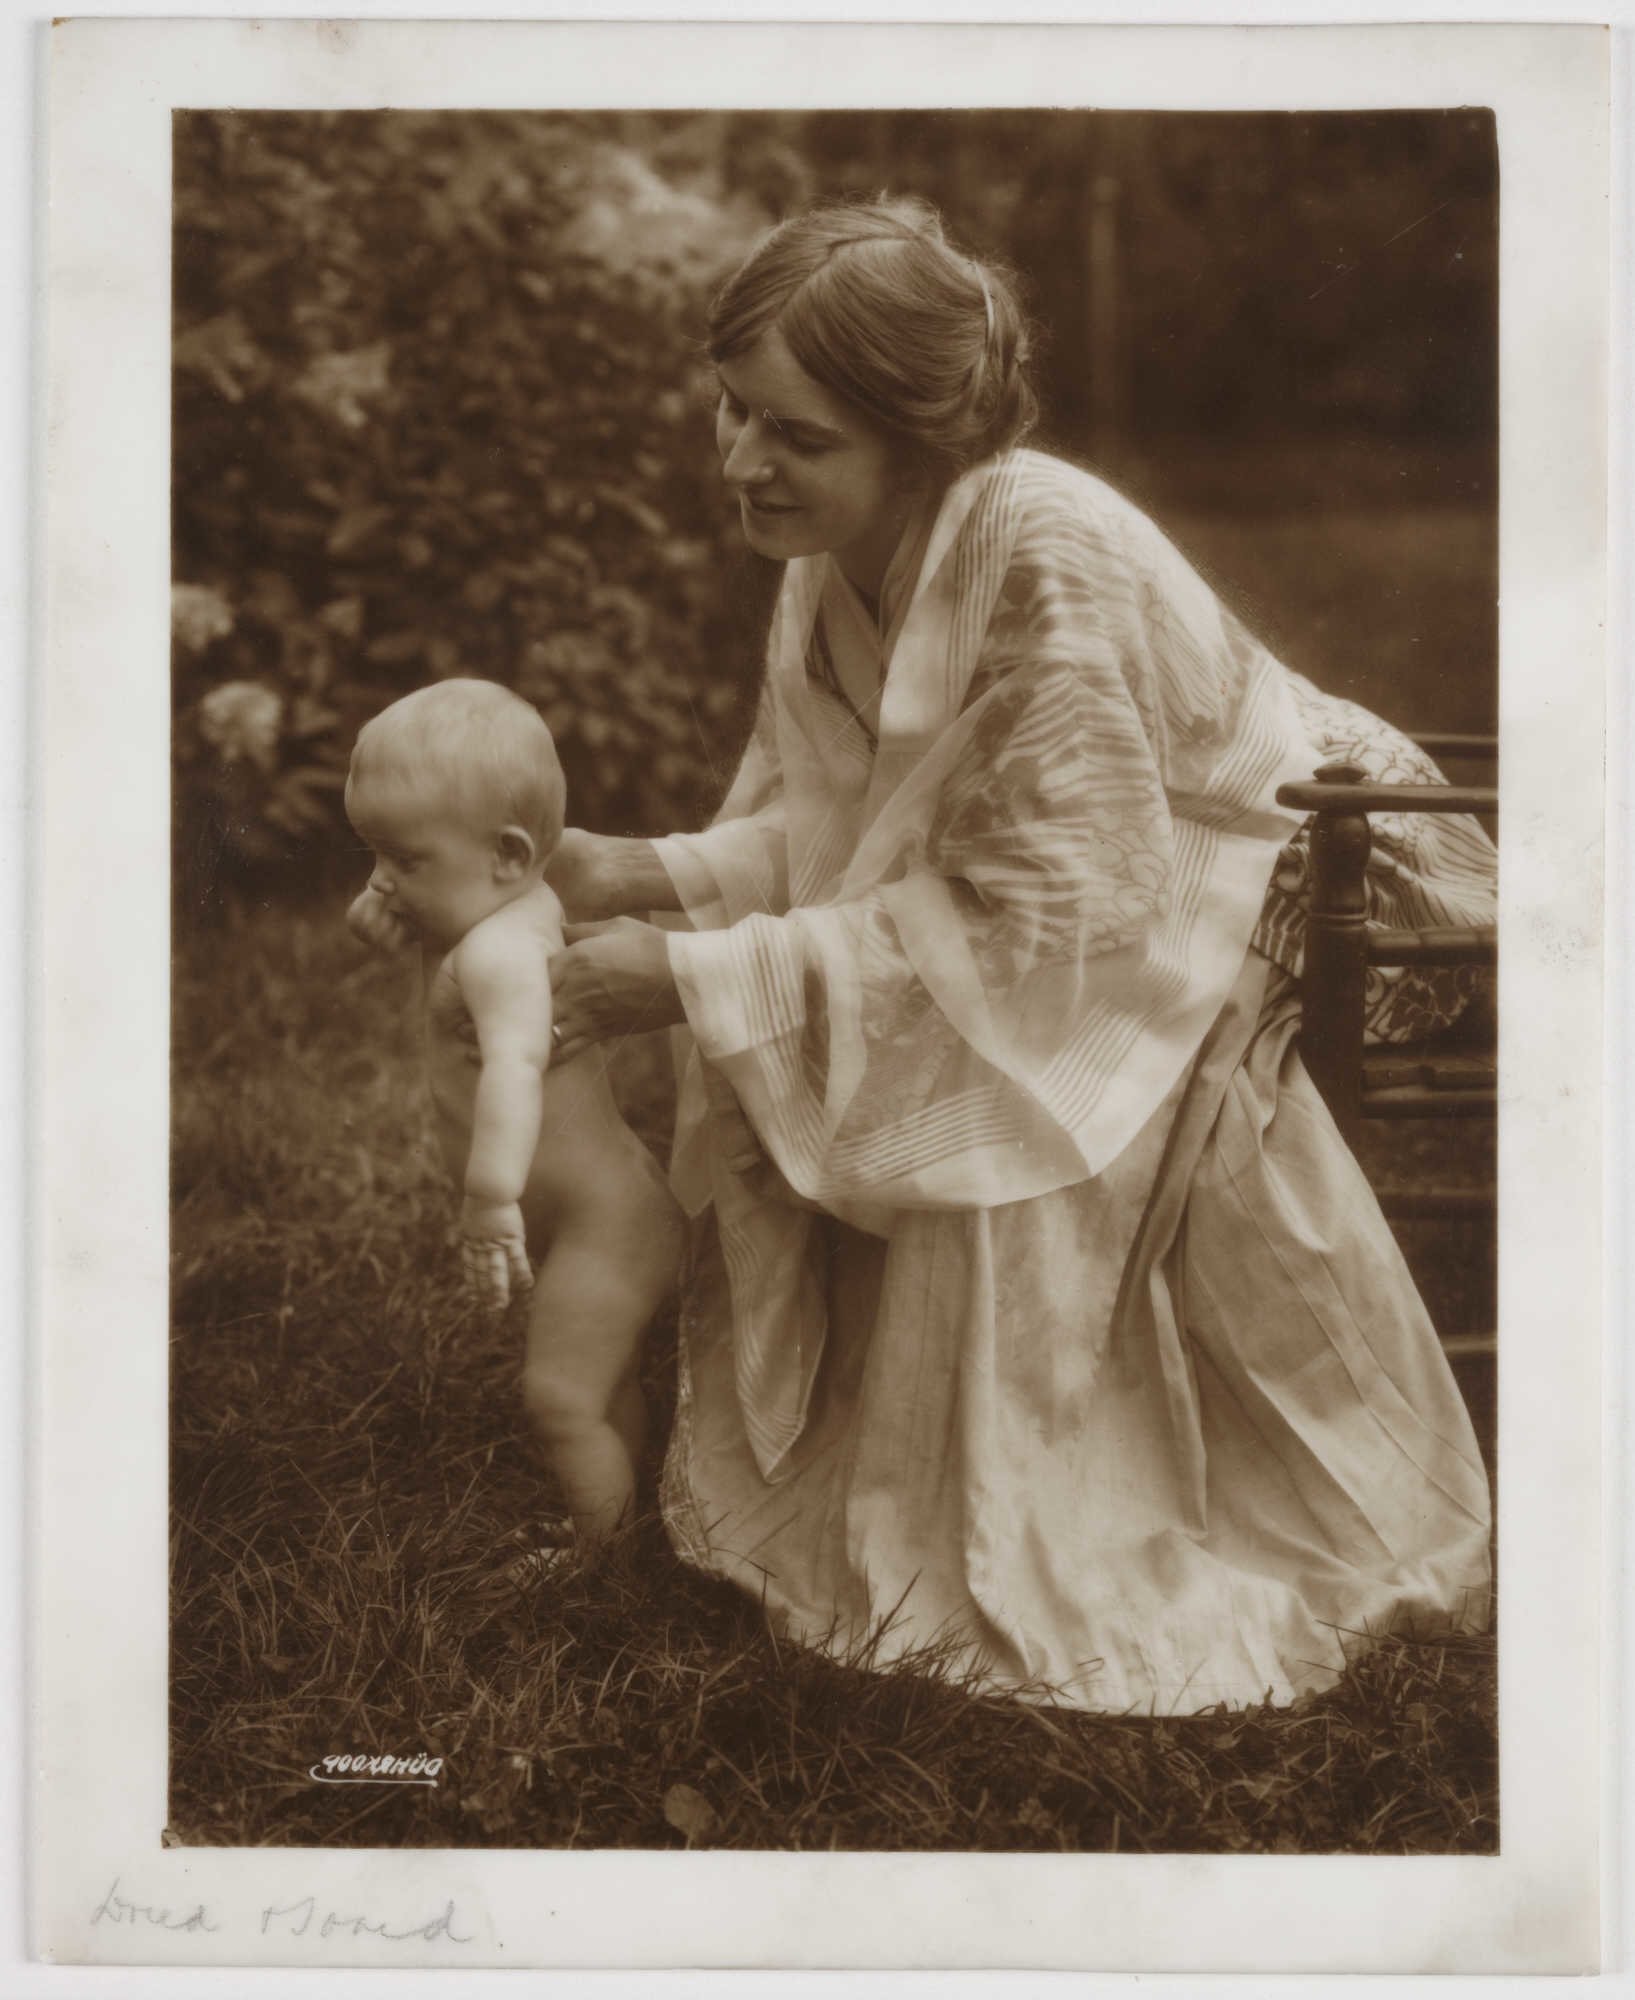 photograph of a mother and child in a garden